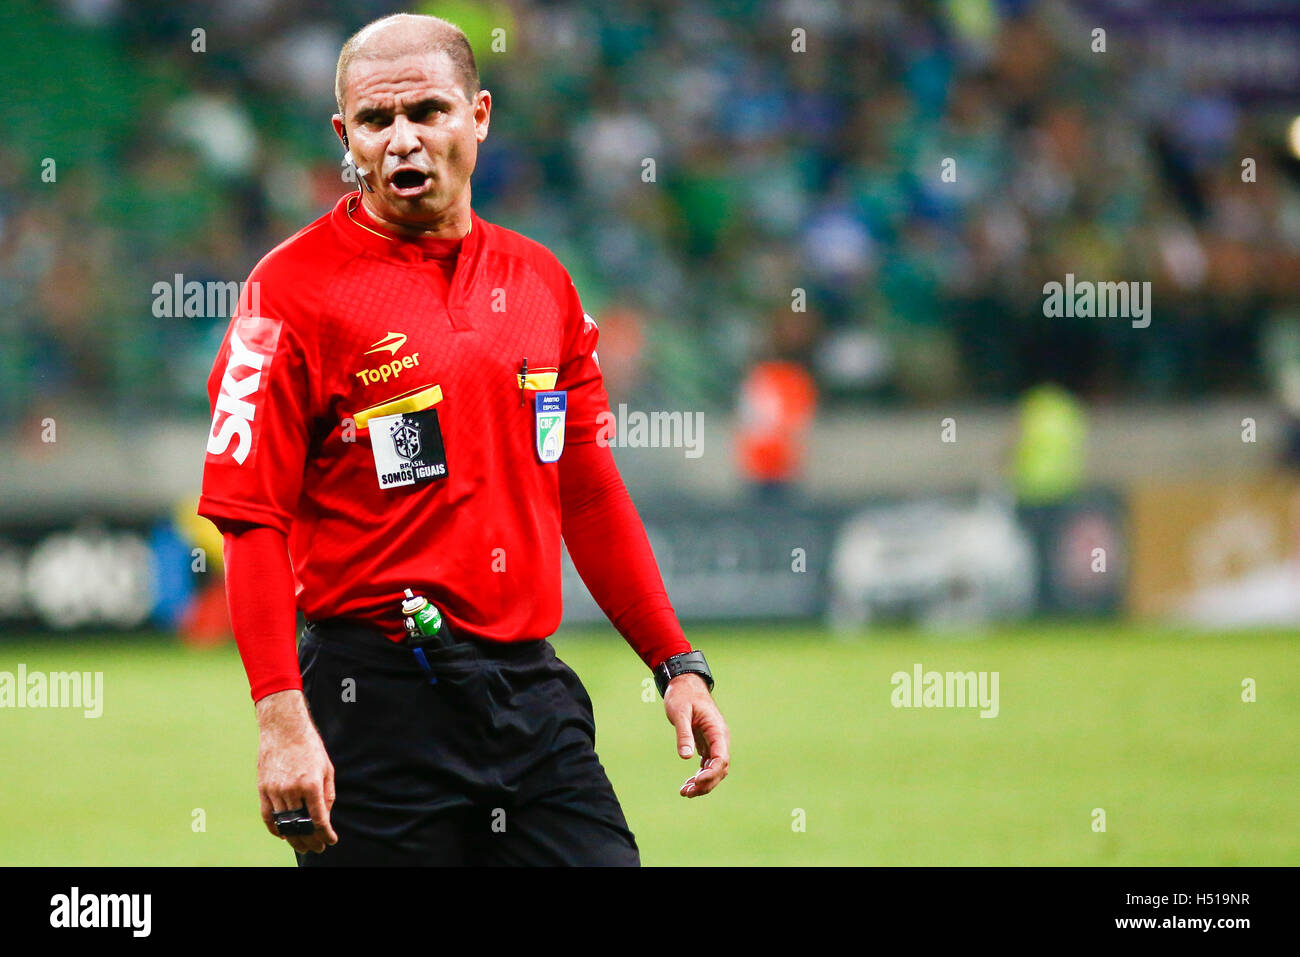 SÃO PAULO, SP - 19.10.2016: PALMEIRAS X GRÊMIO - Referee during the match between Palmeiras and Gremio held at Allianz Park, West Zone of São Paulo. The game is valid for the quarterfinals of the Brazil 2016 World Cup. (Photo: Marco Galvão/Fotoarena) Stock Photo